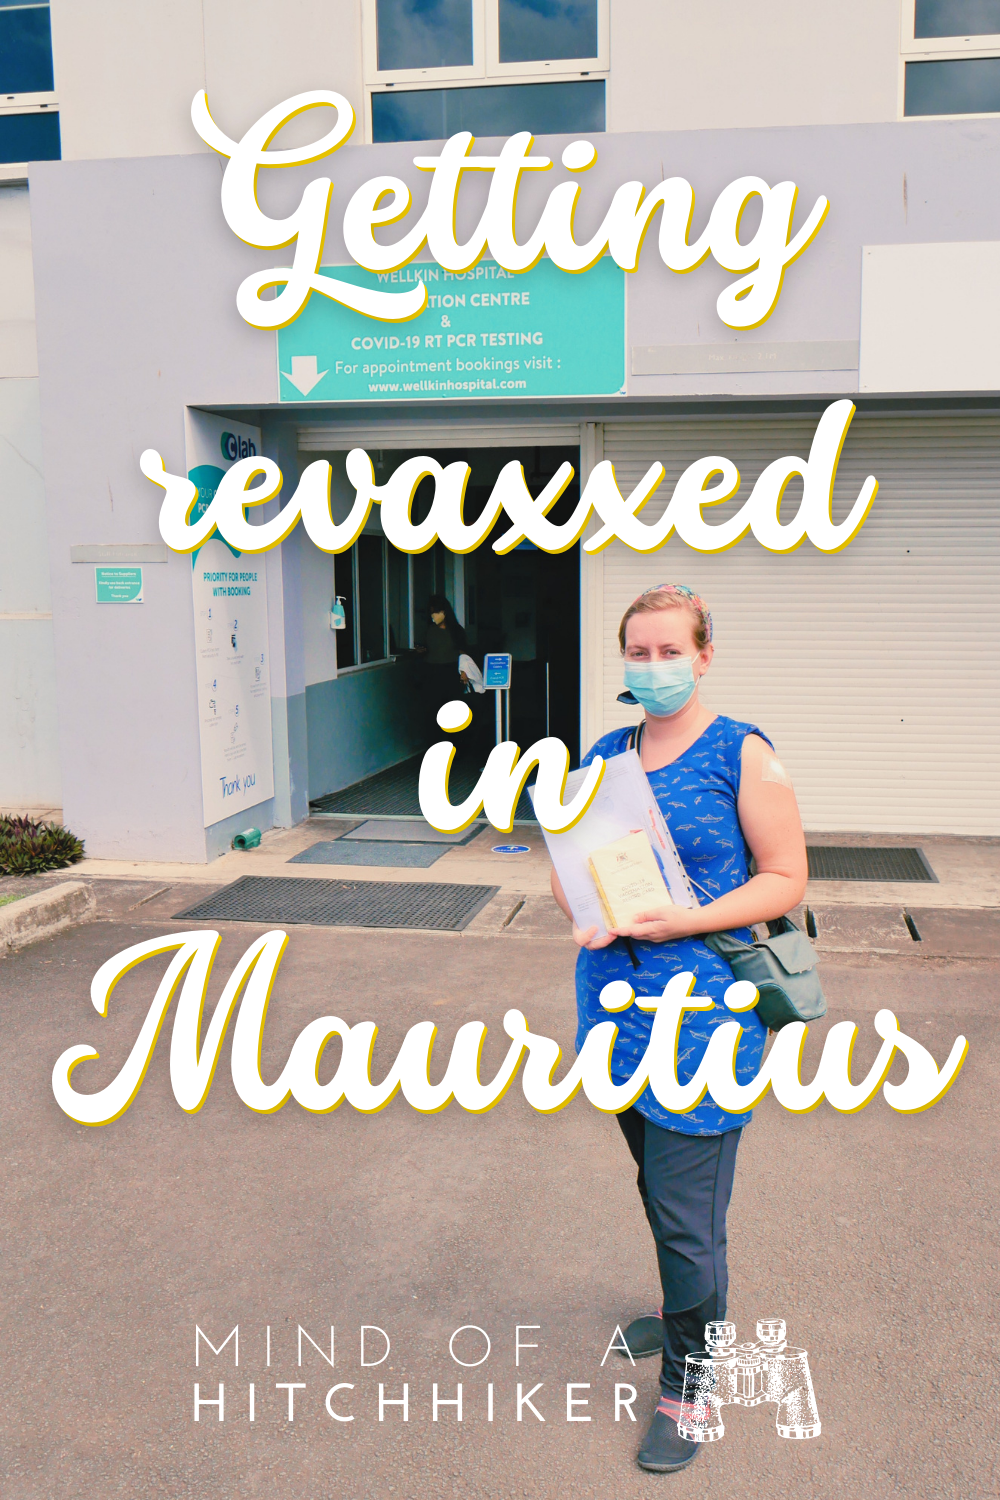 2 getting the booster vaccine in Mauritius